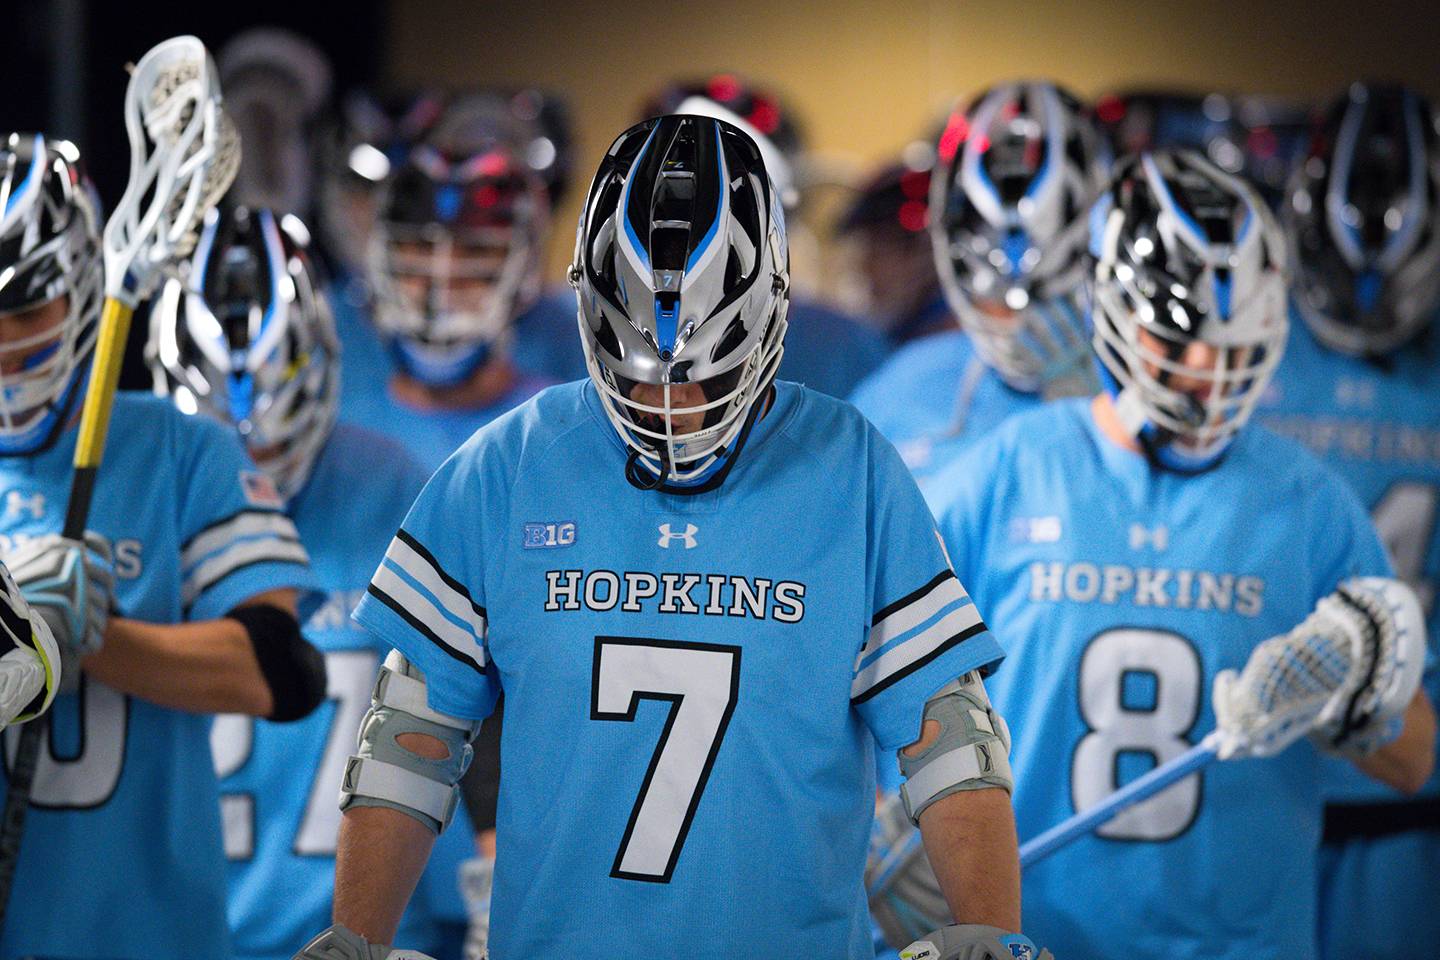 a group of Hopkins lacrosse players in their uniforms